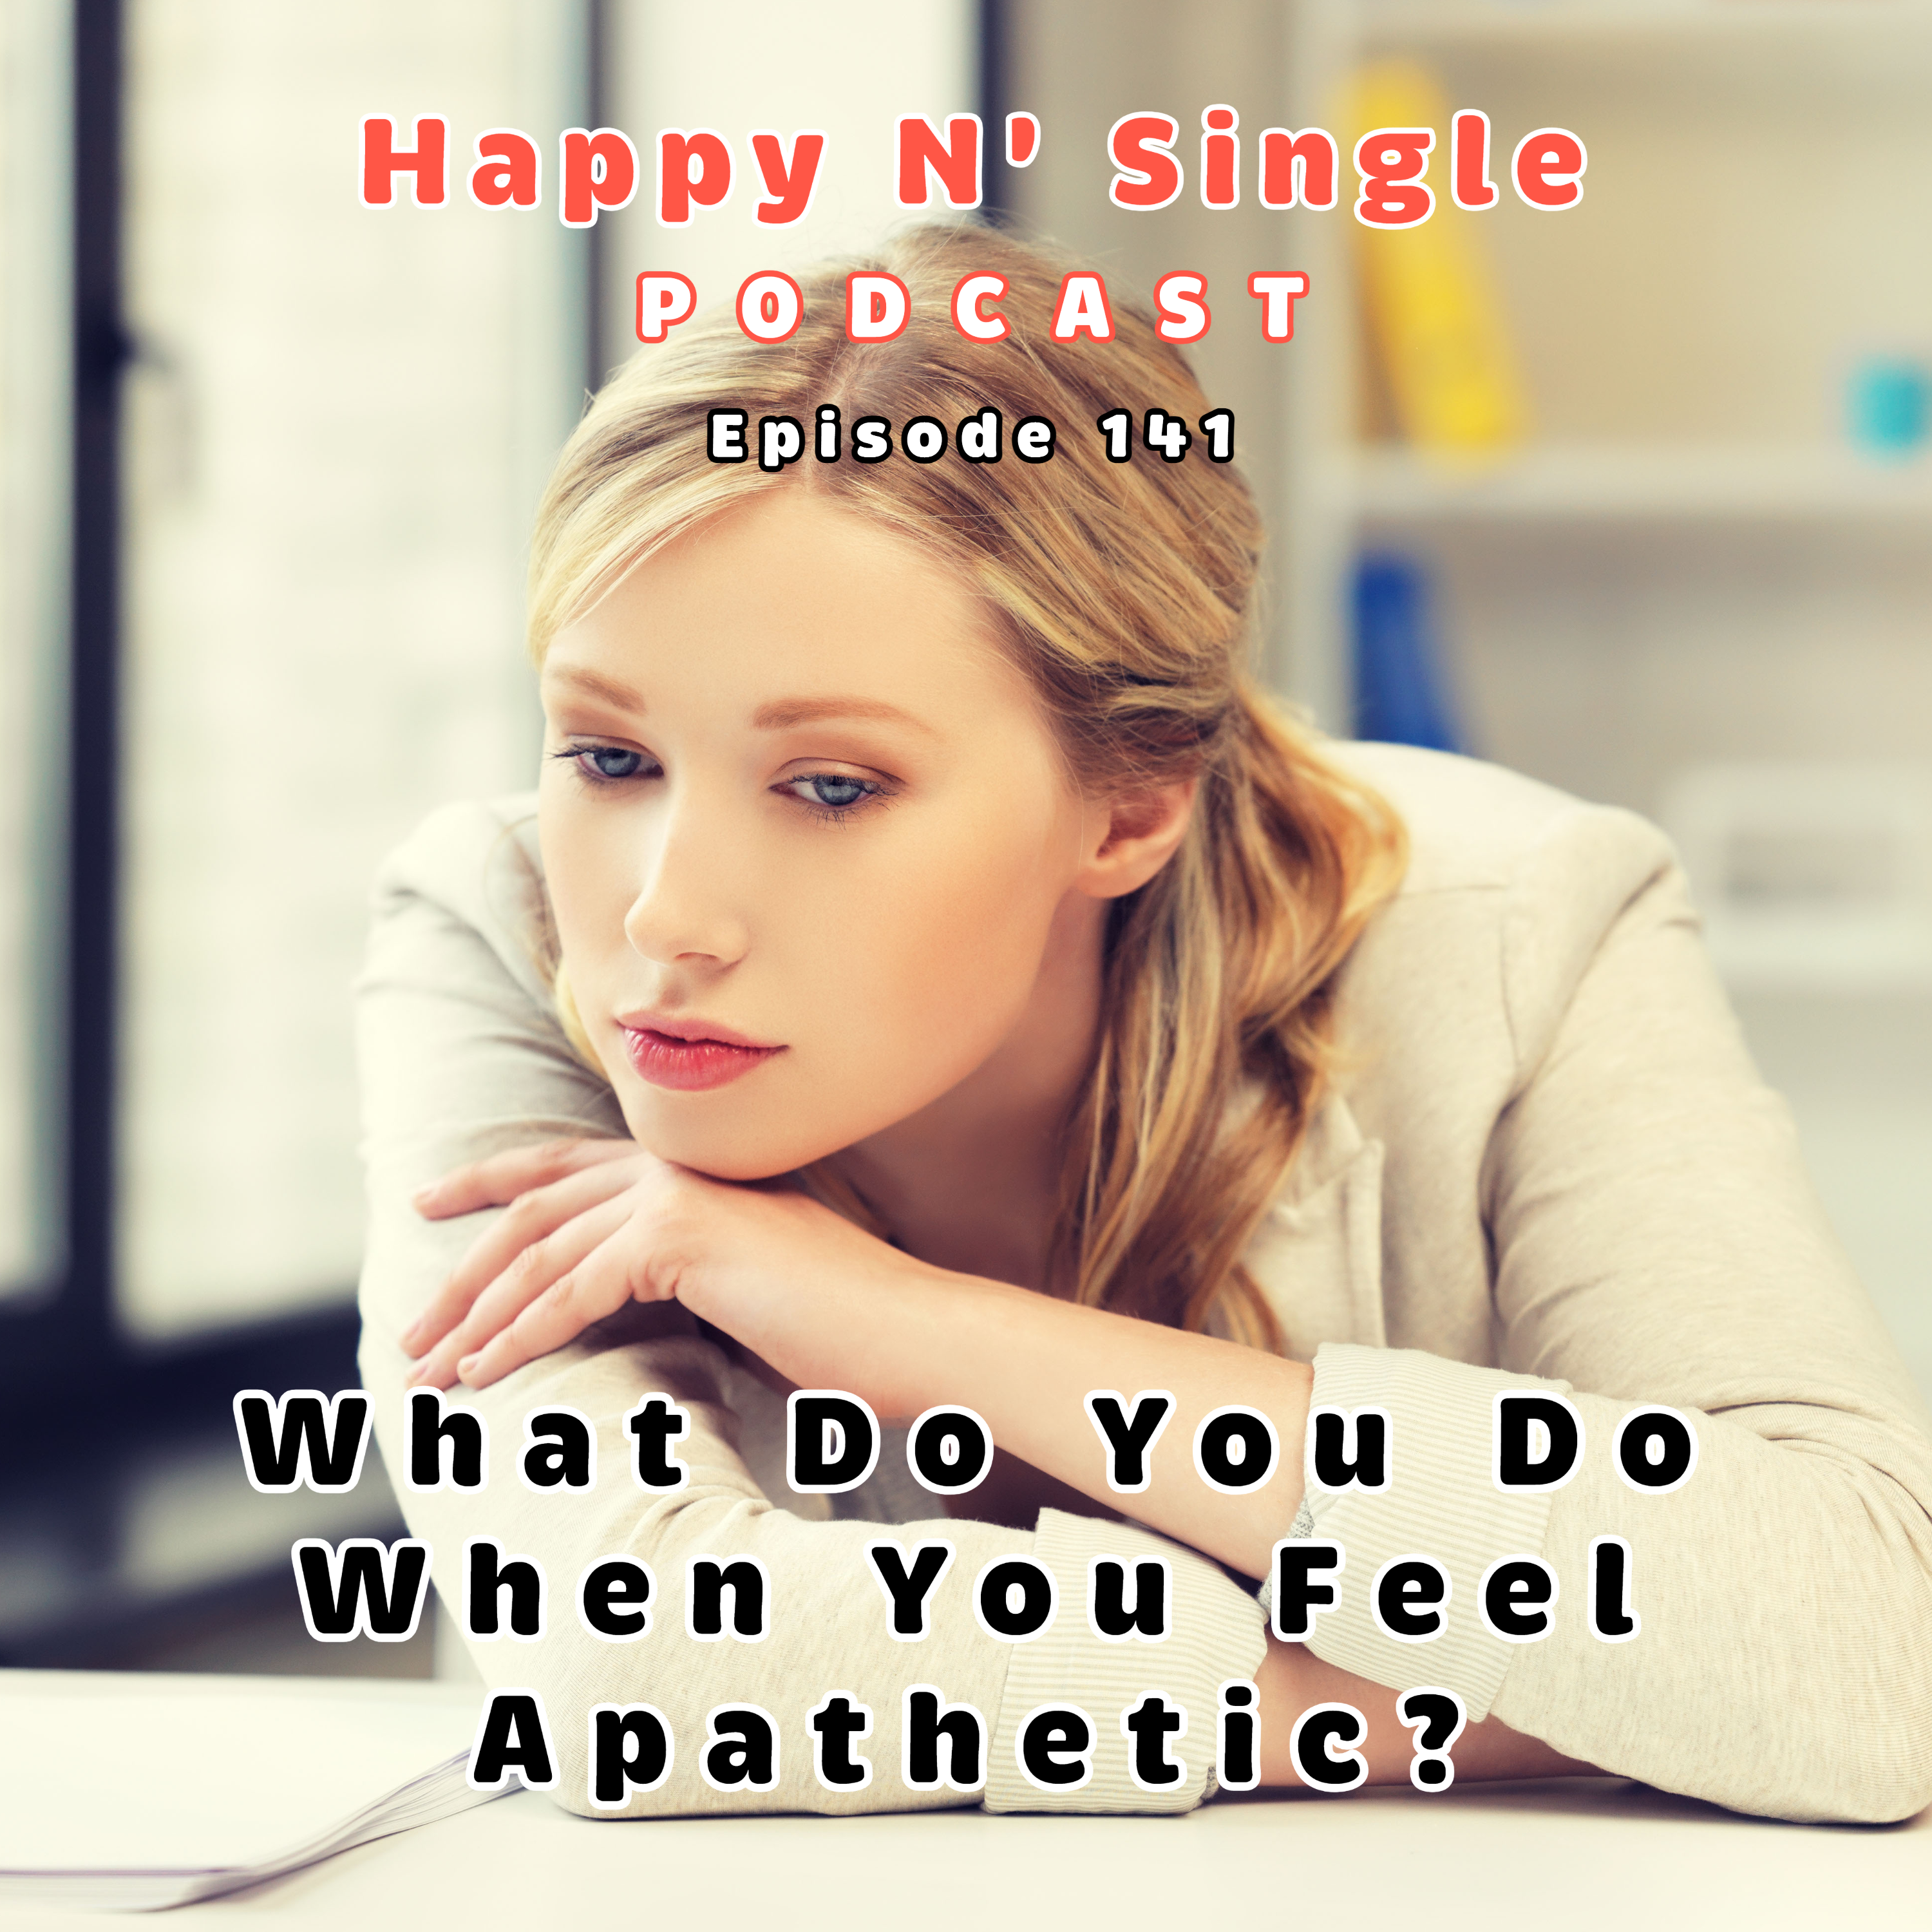 What Do You Do When You Feel Apathetic?